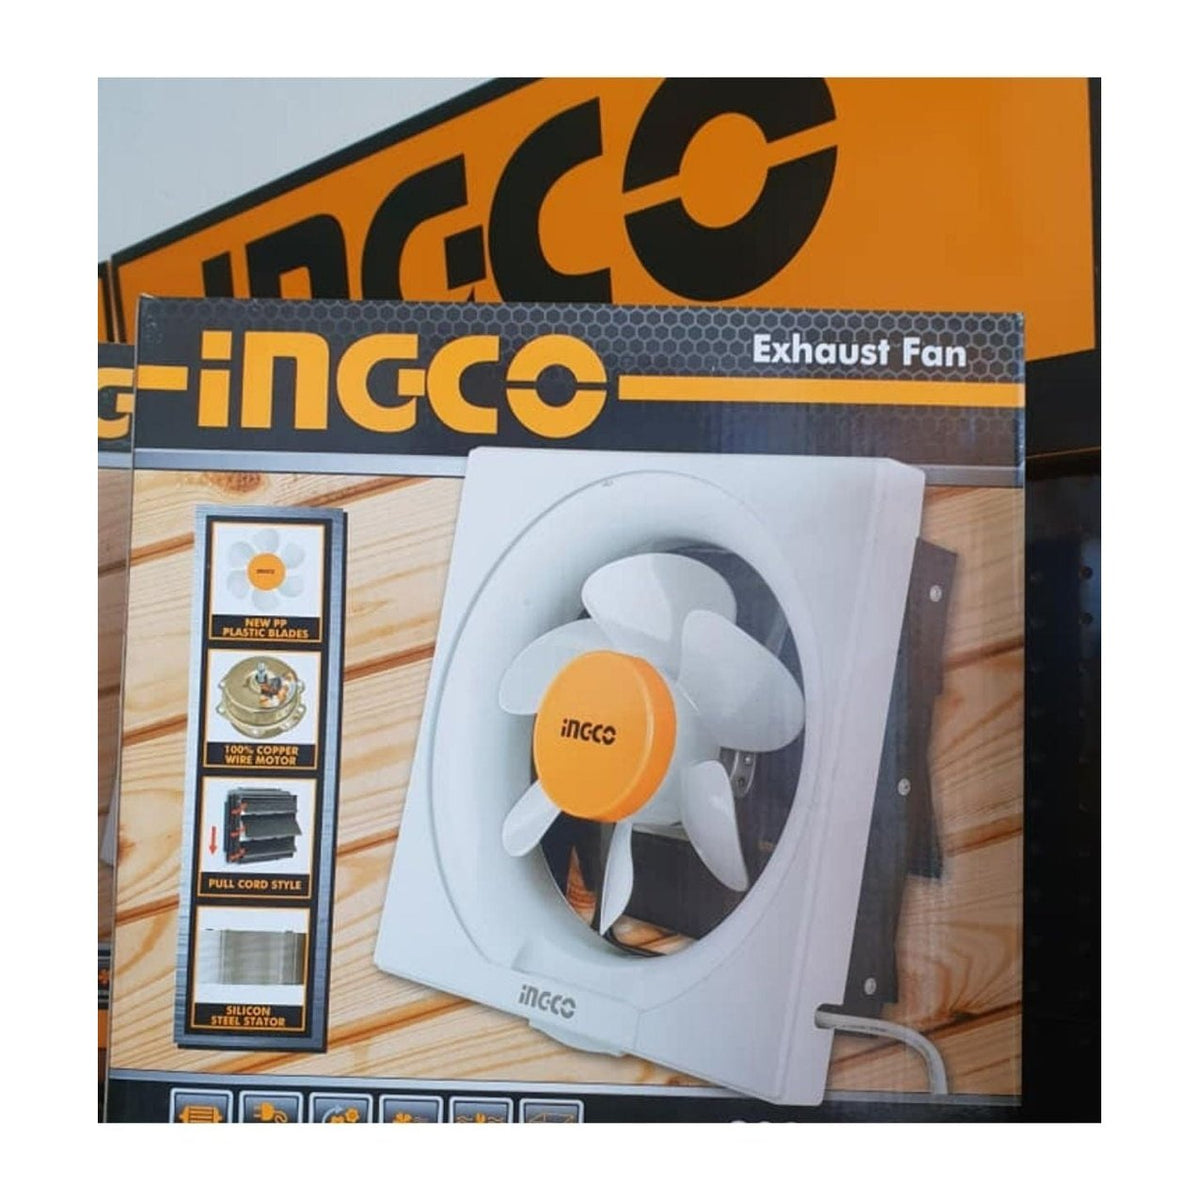 Ingco 10" Exhaust Fan 38W - EF38101 | Supply Master Accra, Ghana Fan & Cooler Buy Tools hardware Building materials